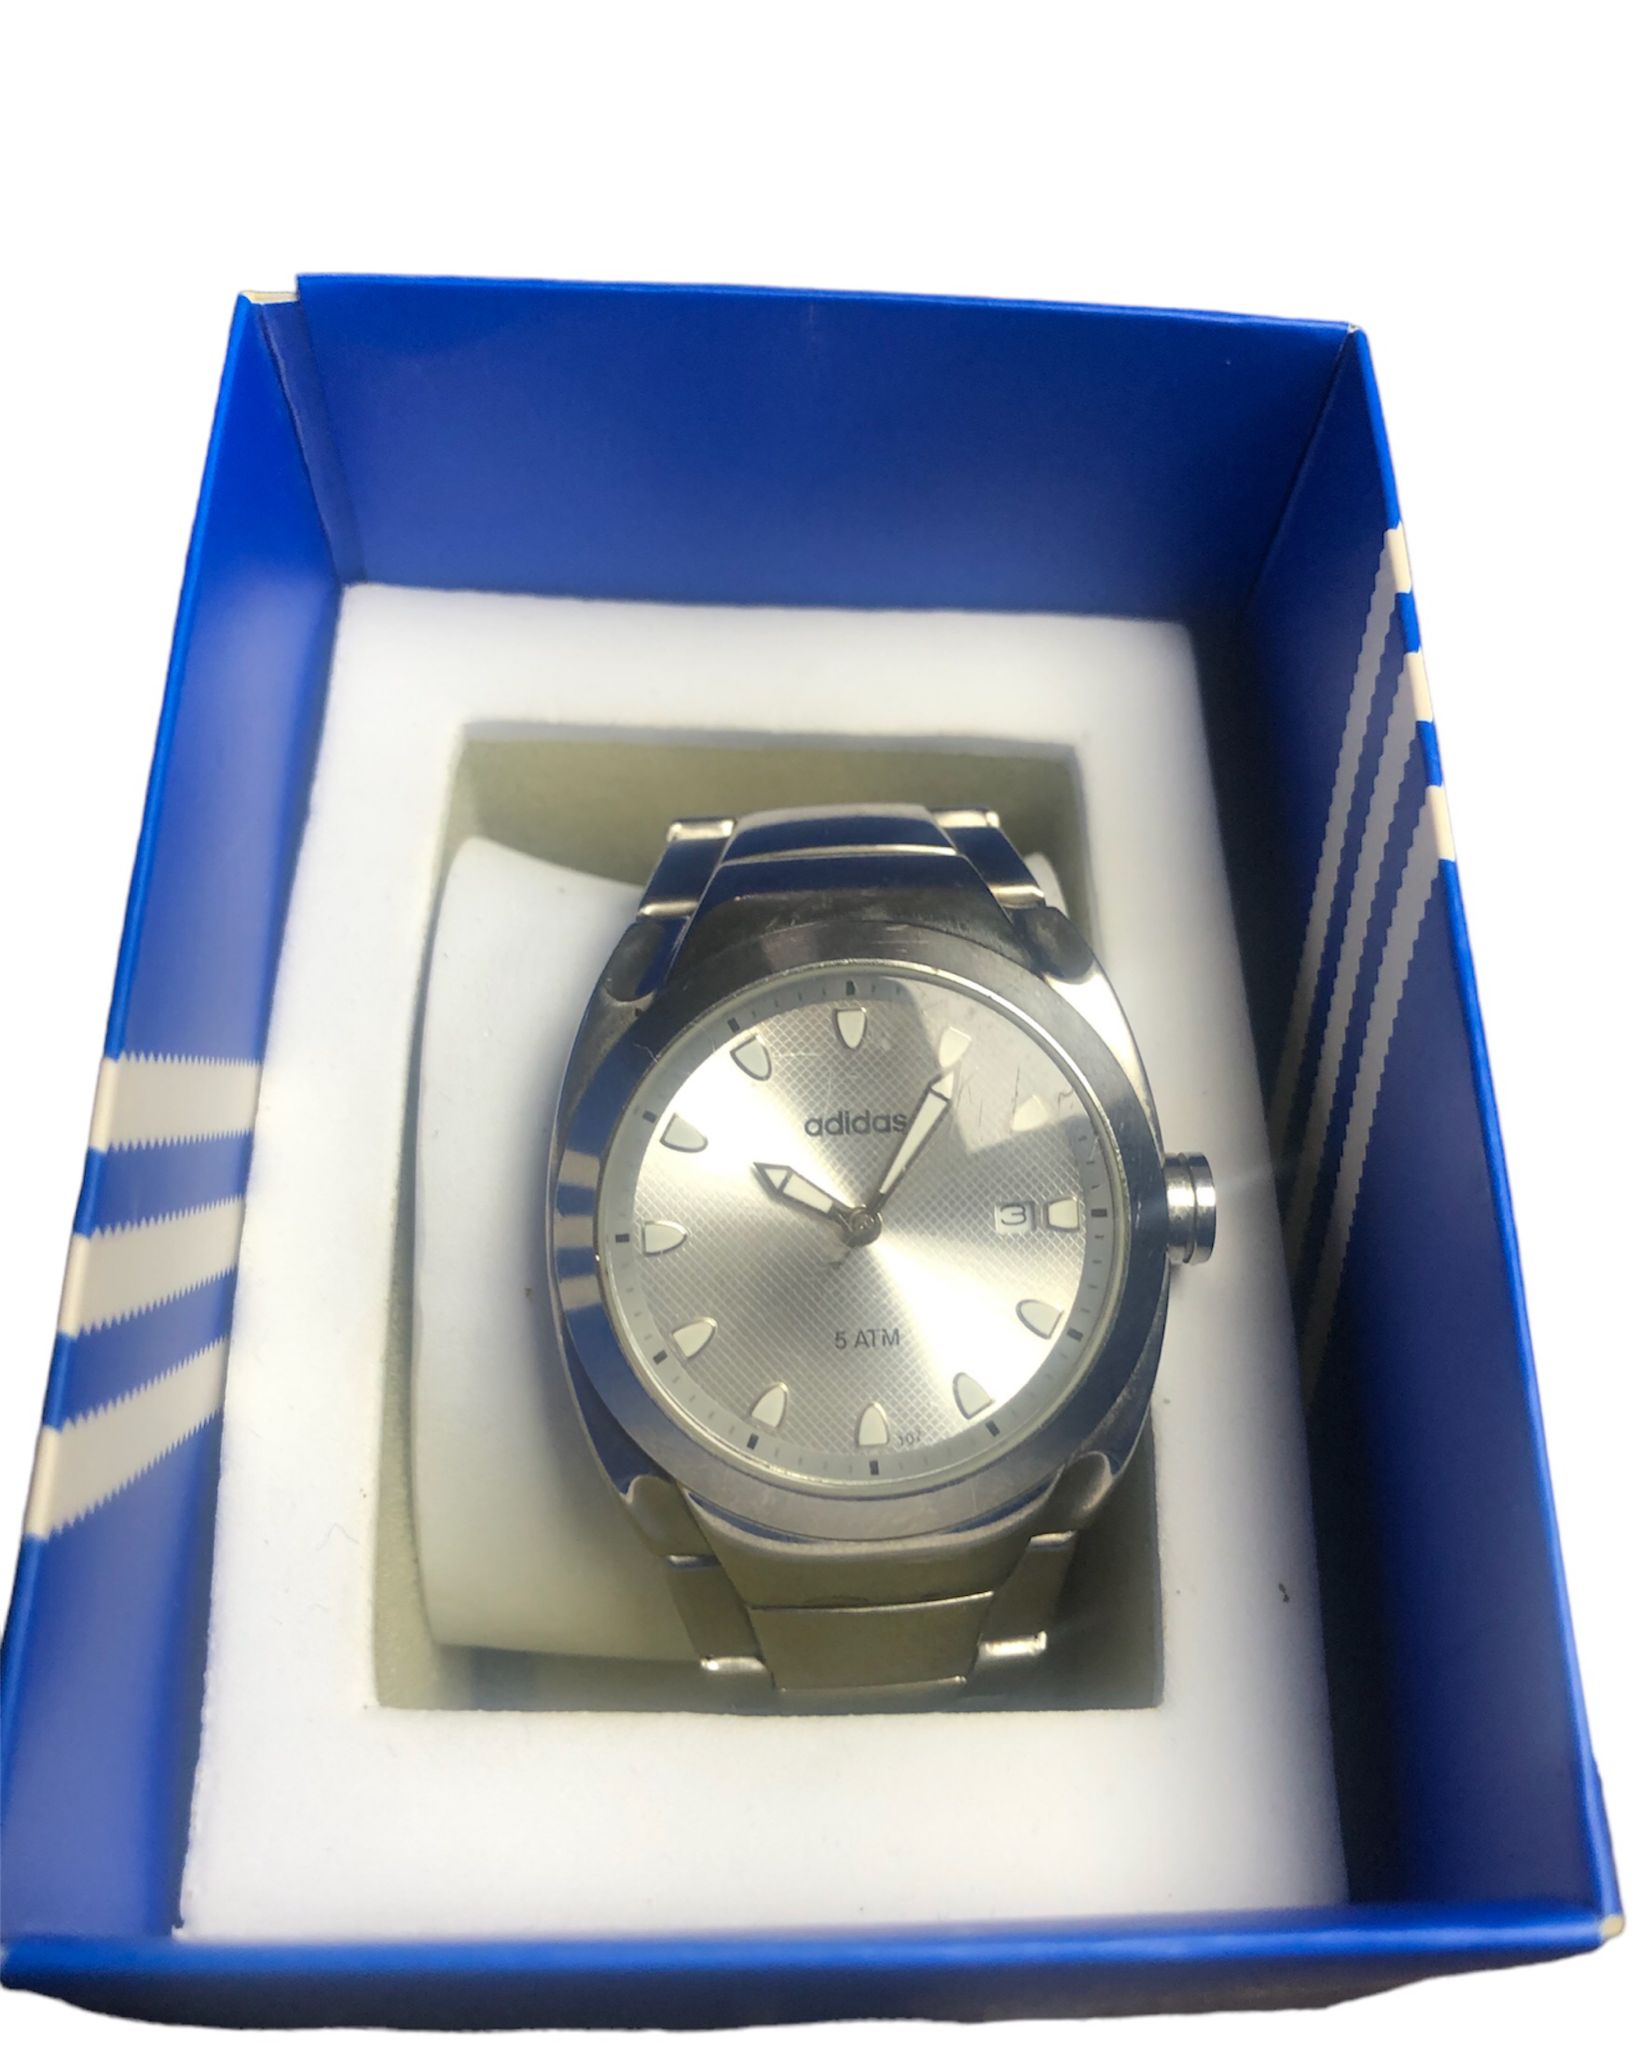 Adidas Mens Watch - S0-10 - Boxed